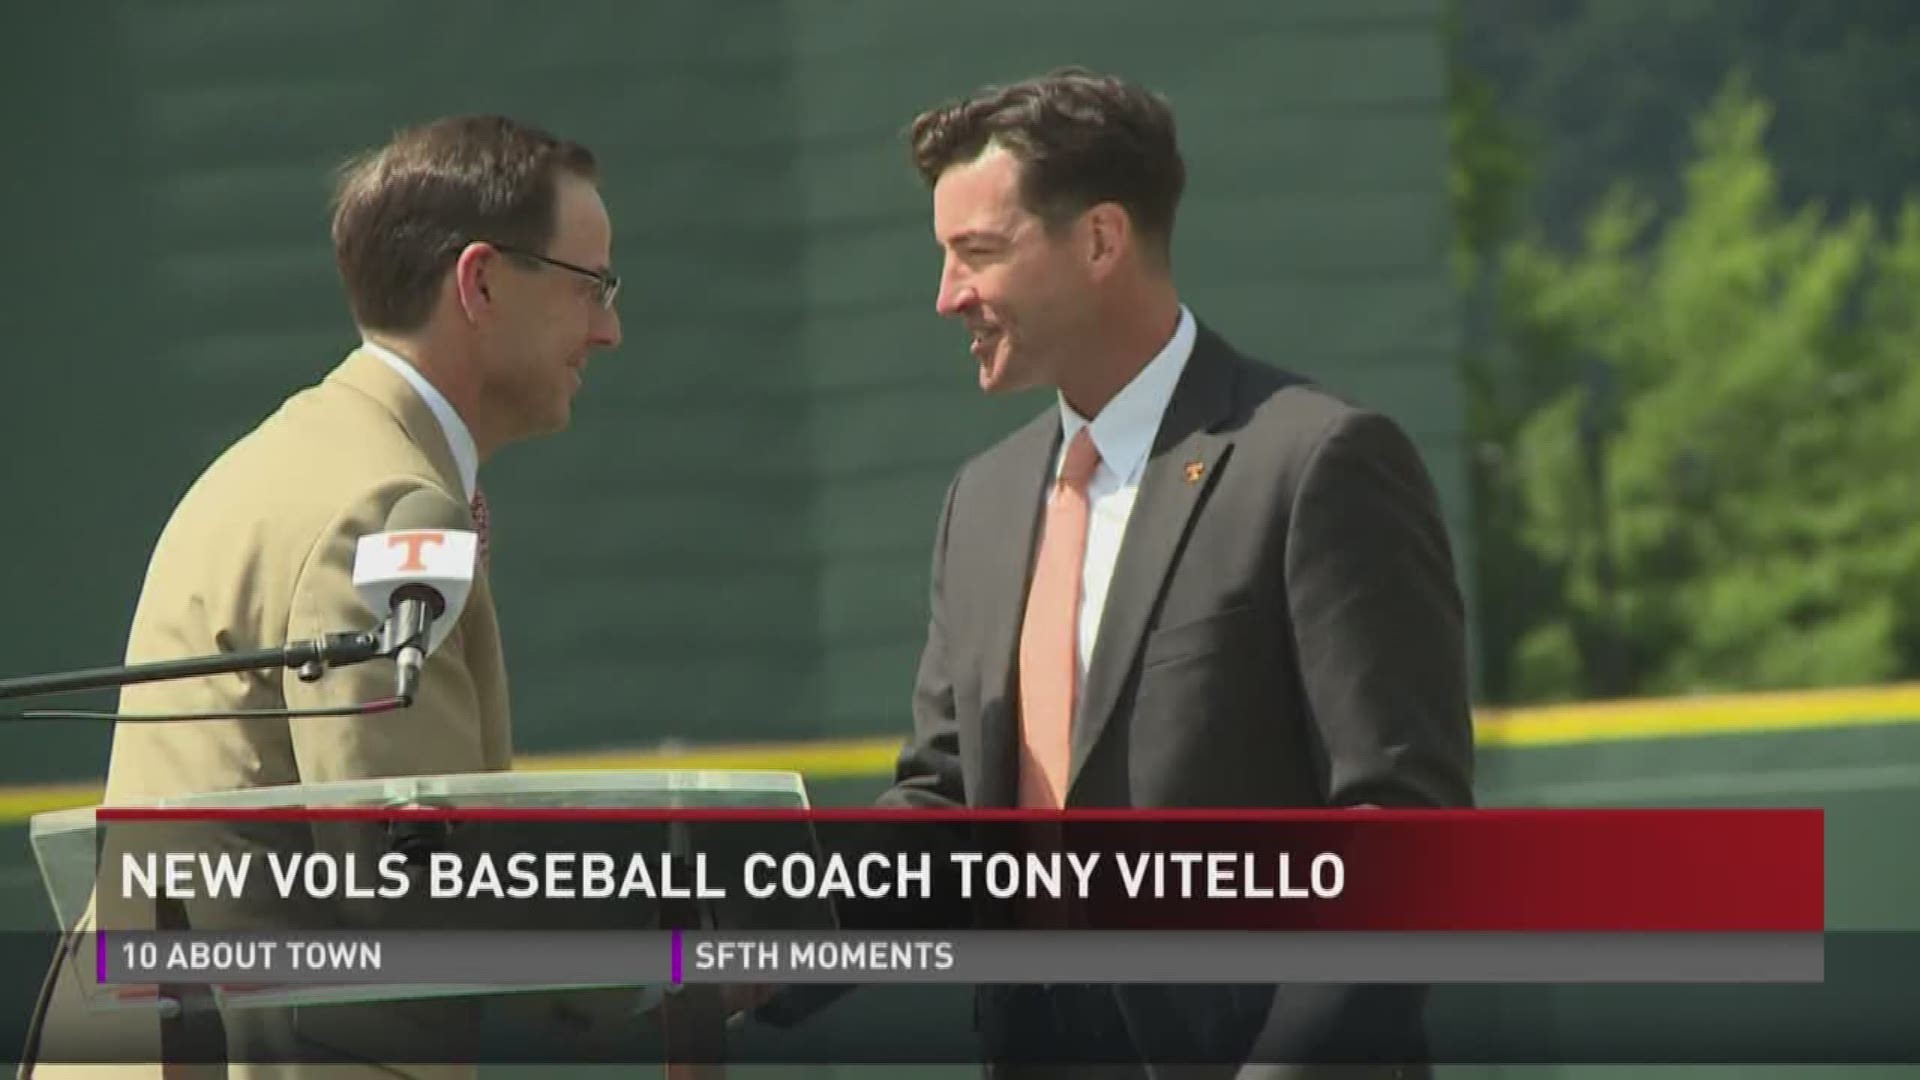 WBIR 10Sports anchor Patrick Murray talks with newly hired Tennessee baseball coach Tony Vitello to find out what drew him to UT.